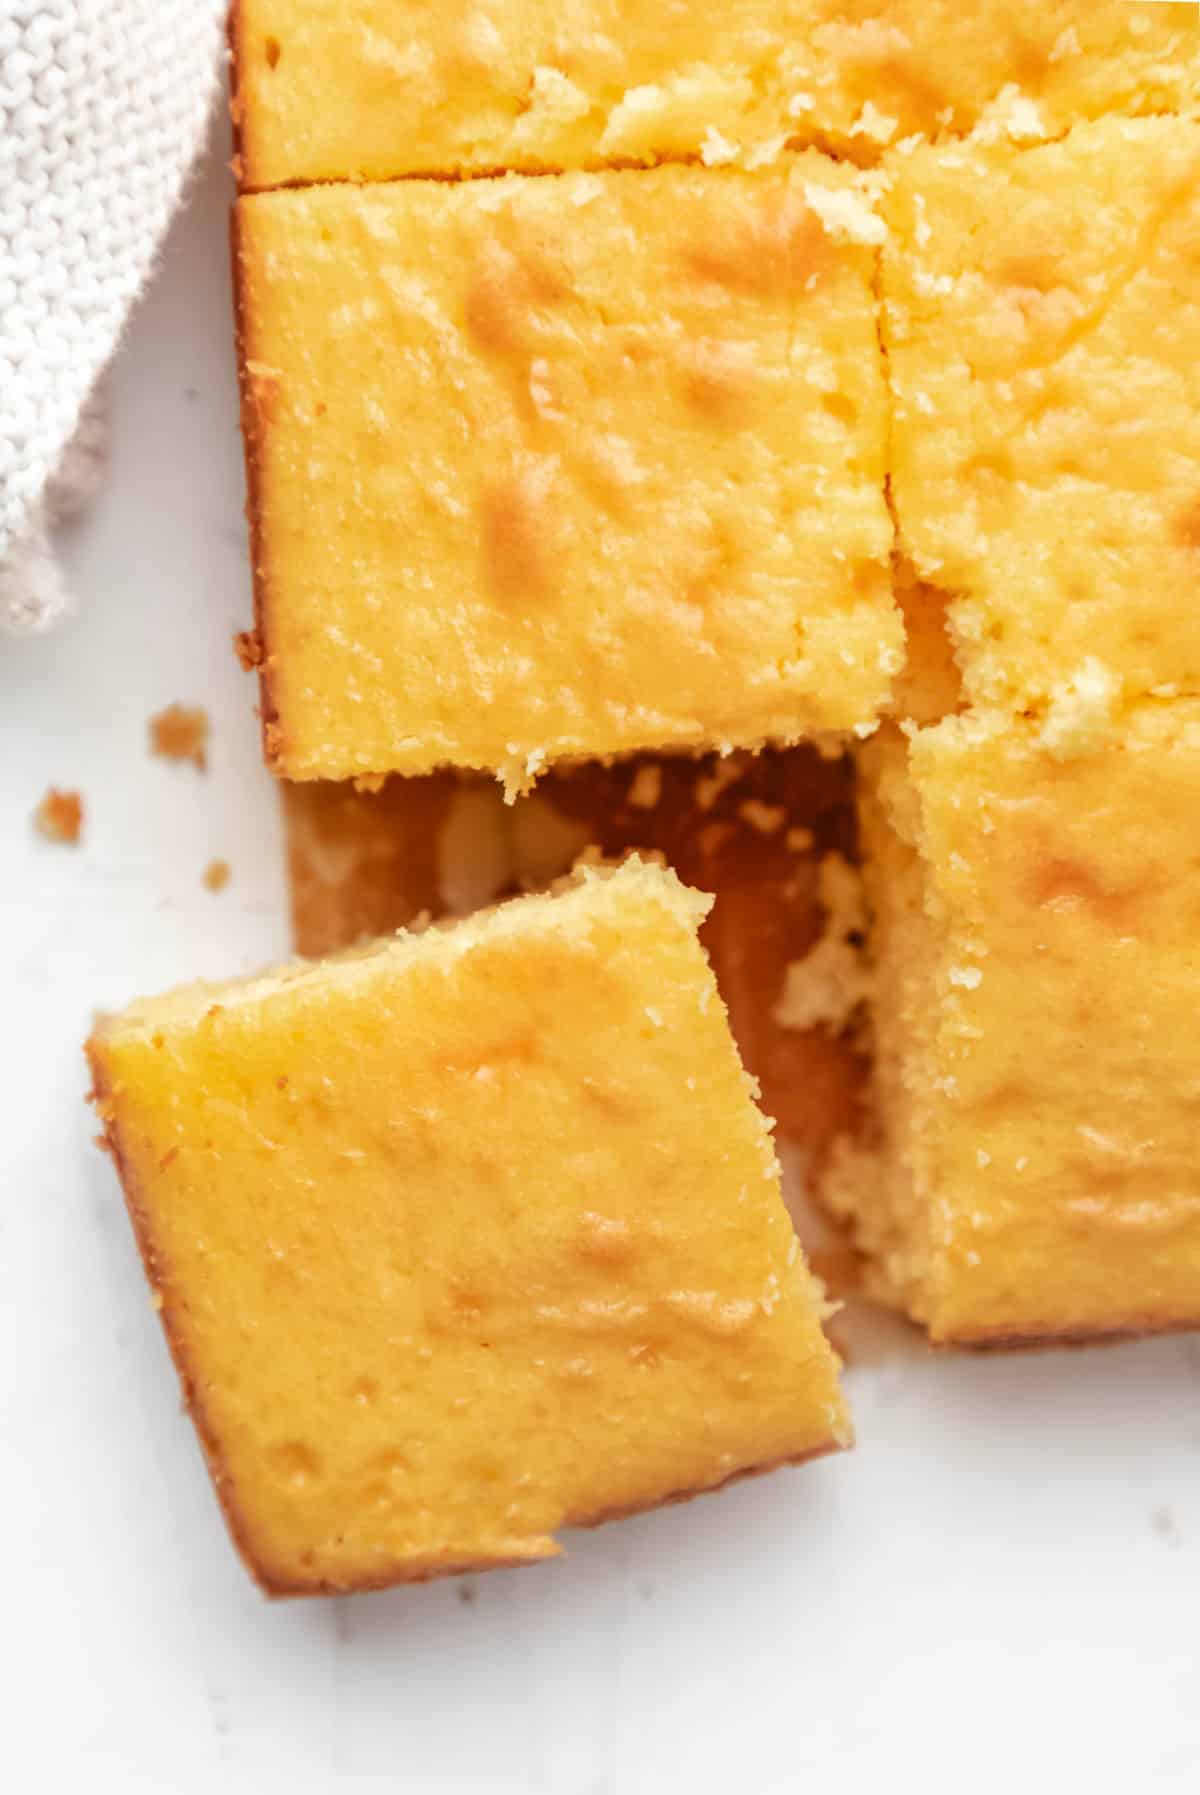 A cut piece of cornbread at an angle next to the pan of cornbread.